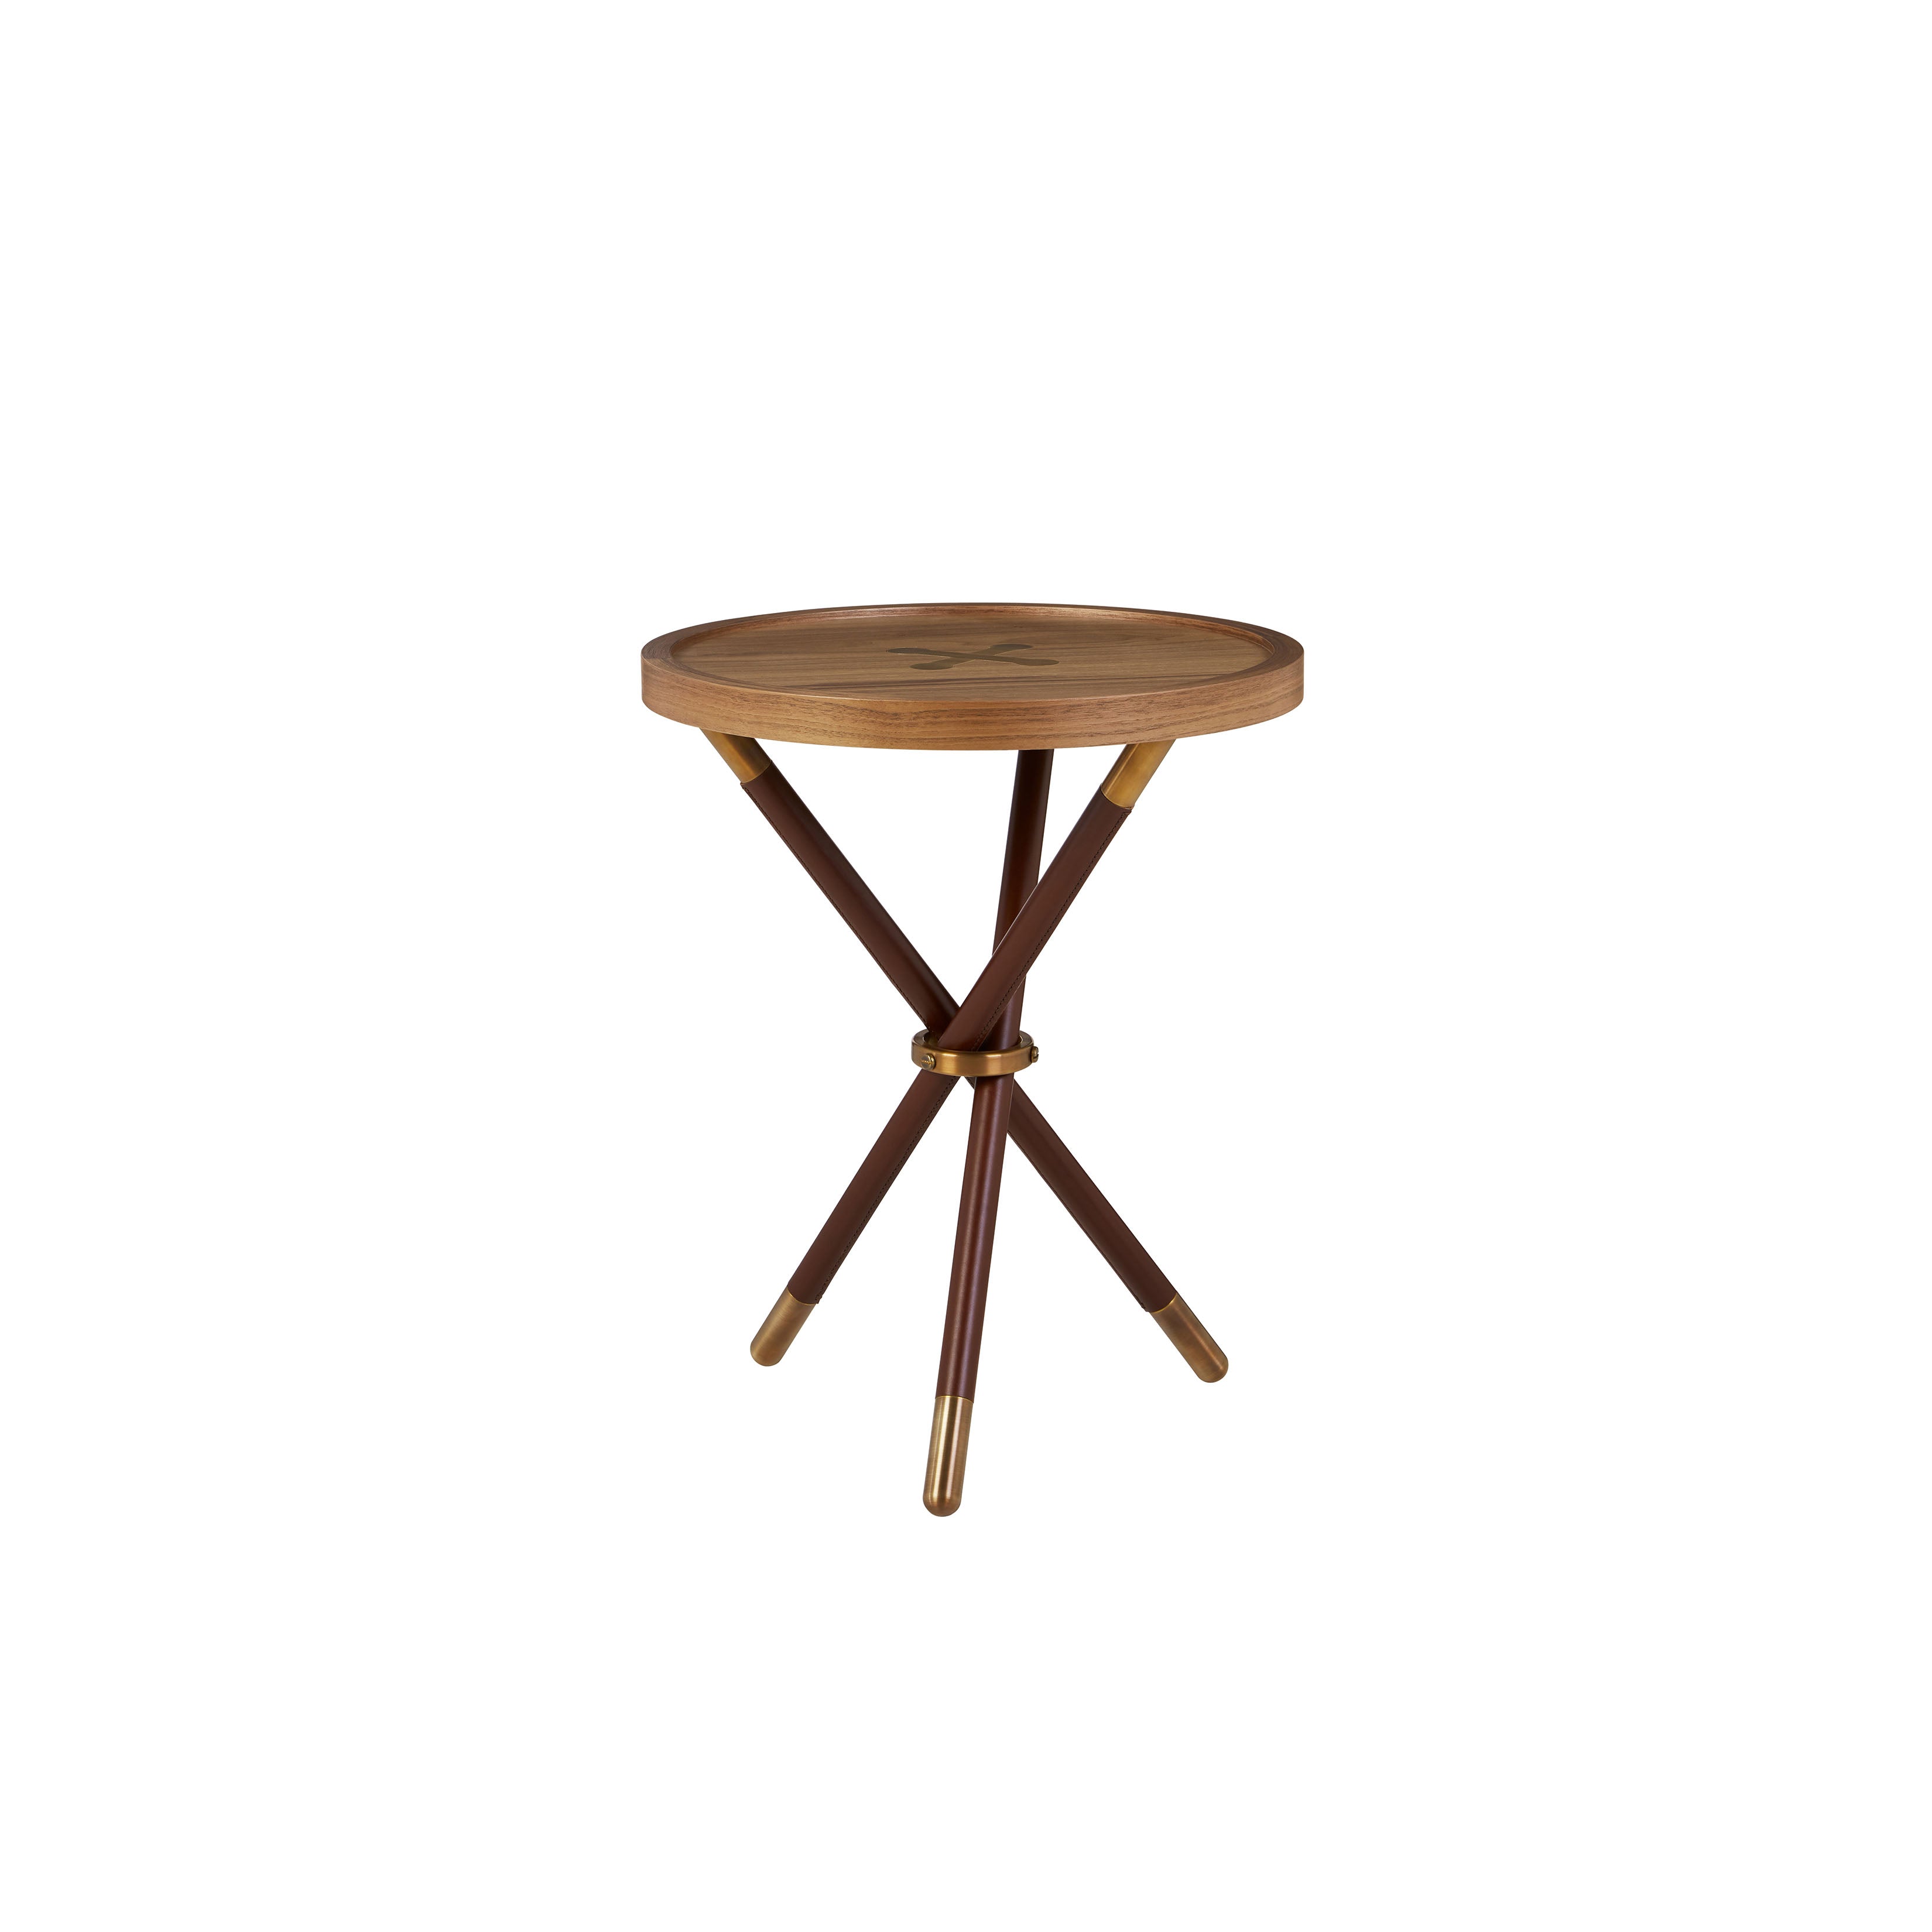 Nina Campbell Button Table - Chestnut